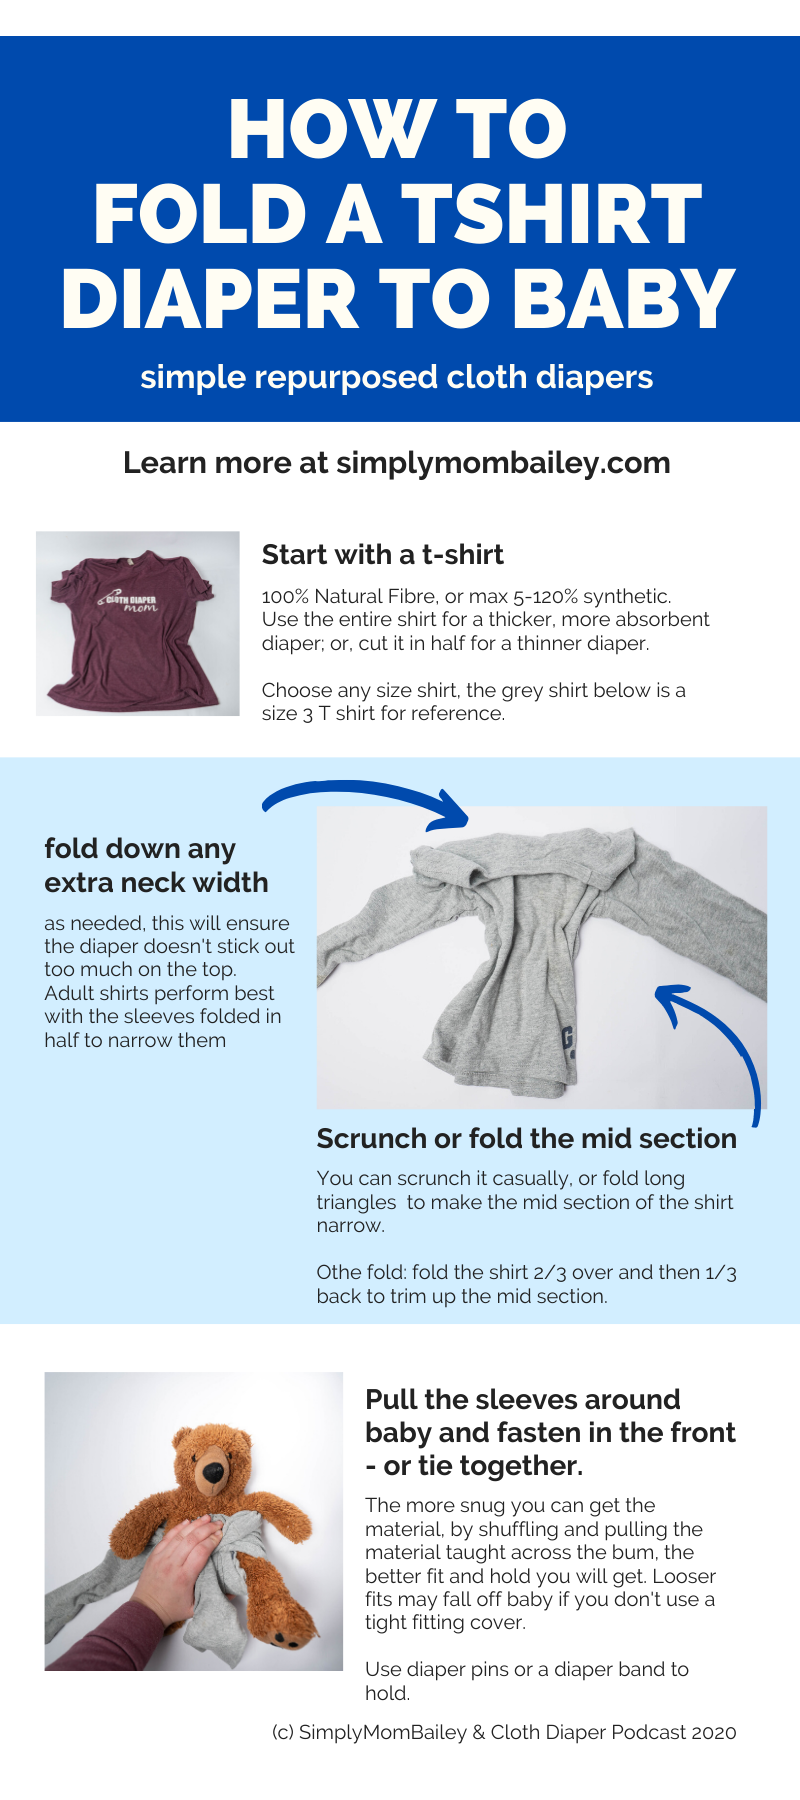 How to Fold a Tshirt onto Baby for a Diaper - Tshirt Diapers